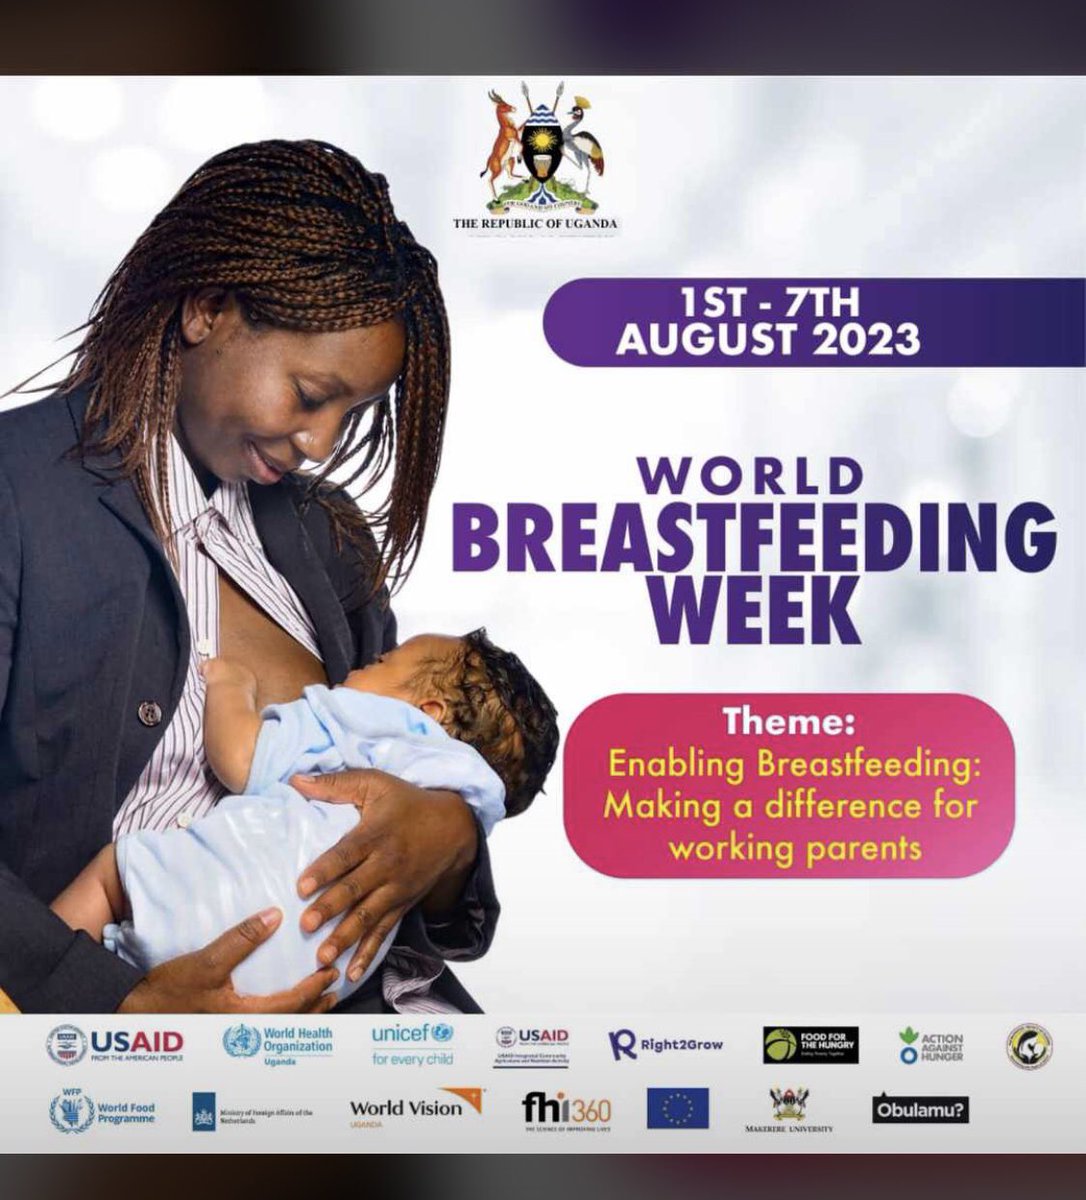 This year's #WorldBreastfeedingWeek2023 theme provides a strategic opportunity to advocate for essential maternity rights that support breastfeeding-maternity leave for a min of 18 weeks, ideally for longer than 6 months, as well as workplace accommodations after this point.